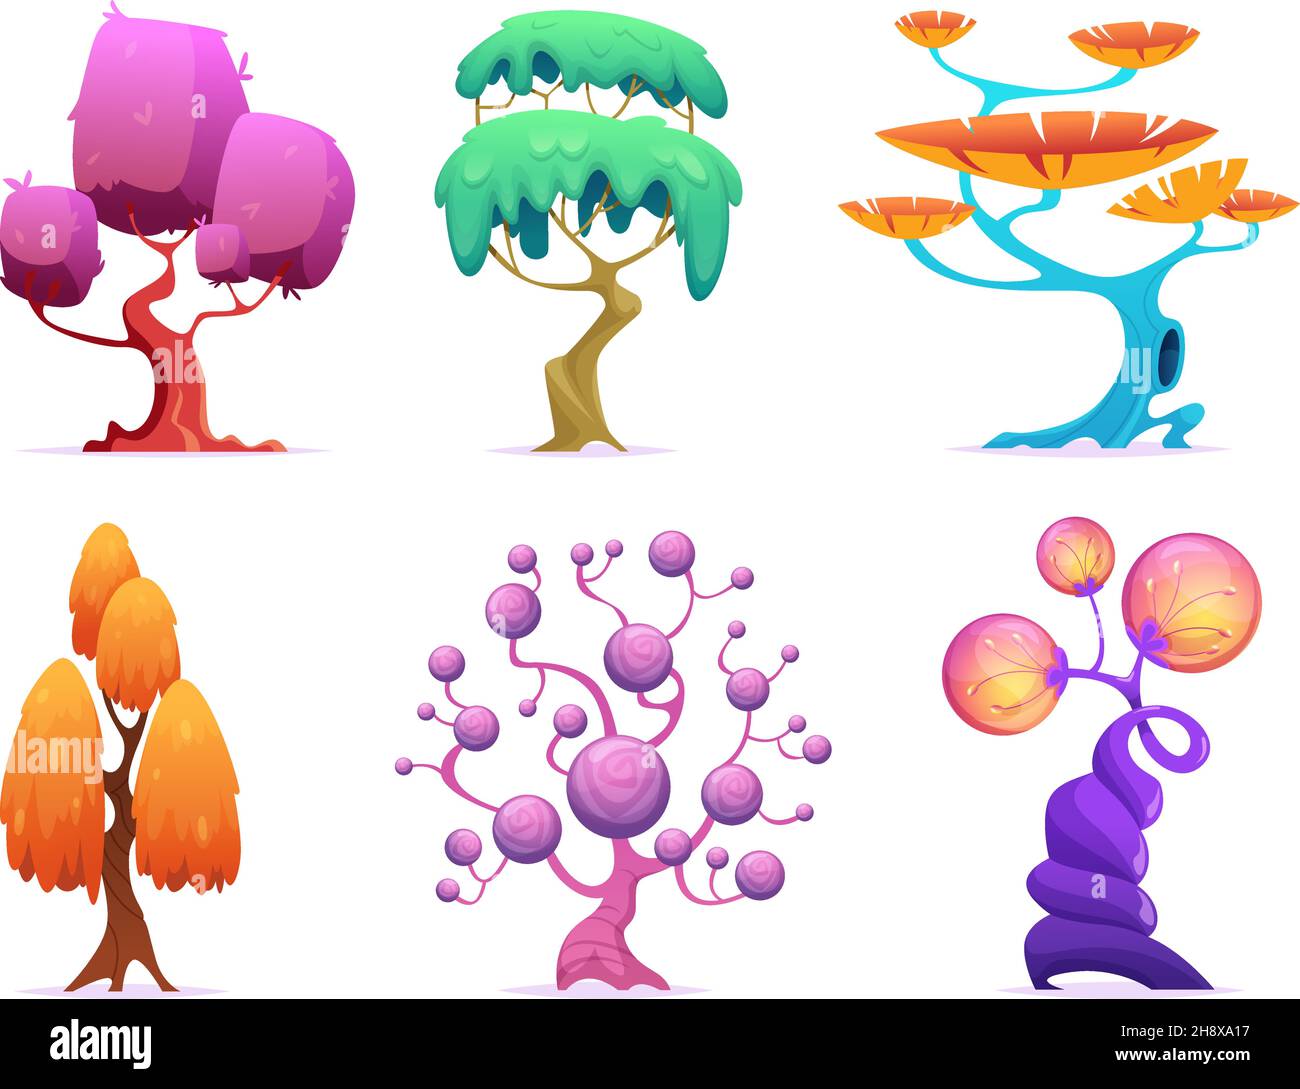 Fantasy tree. Fairytale garden plants glowing forest nature magic symbols exact vector cartoon collection isolated Stock Vector